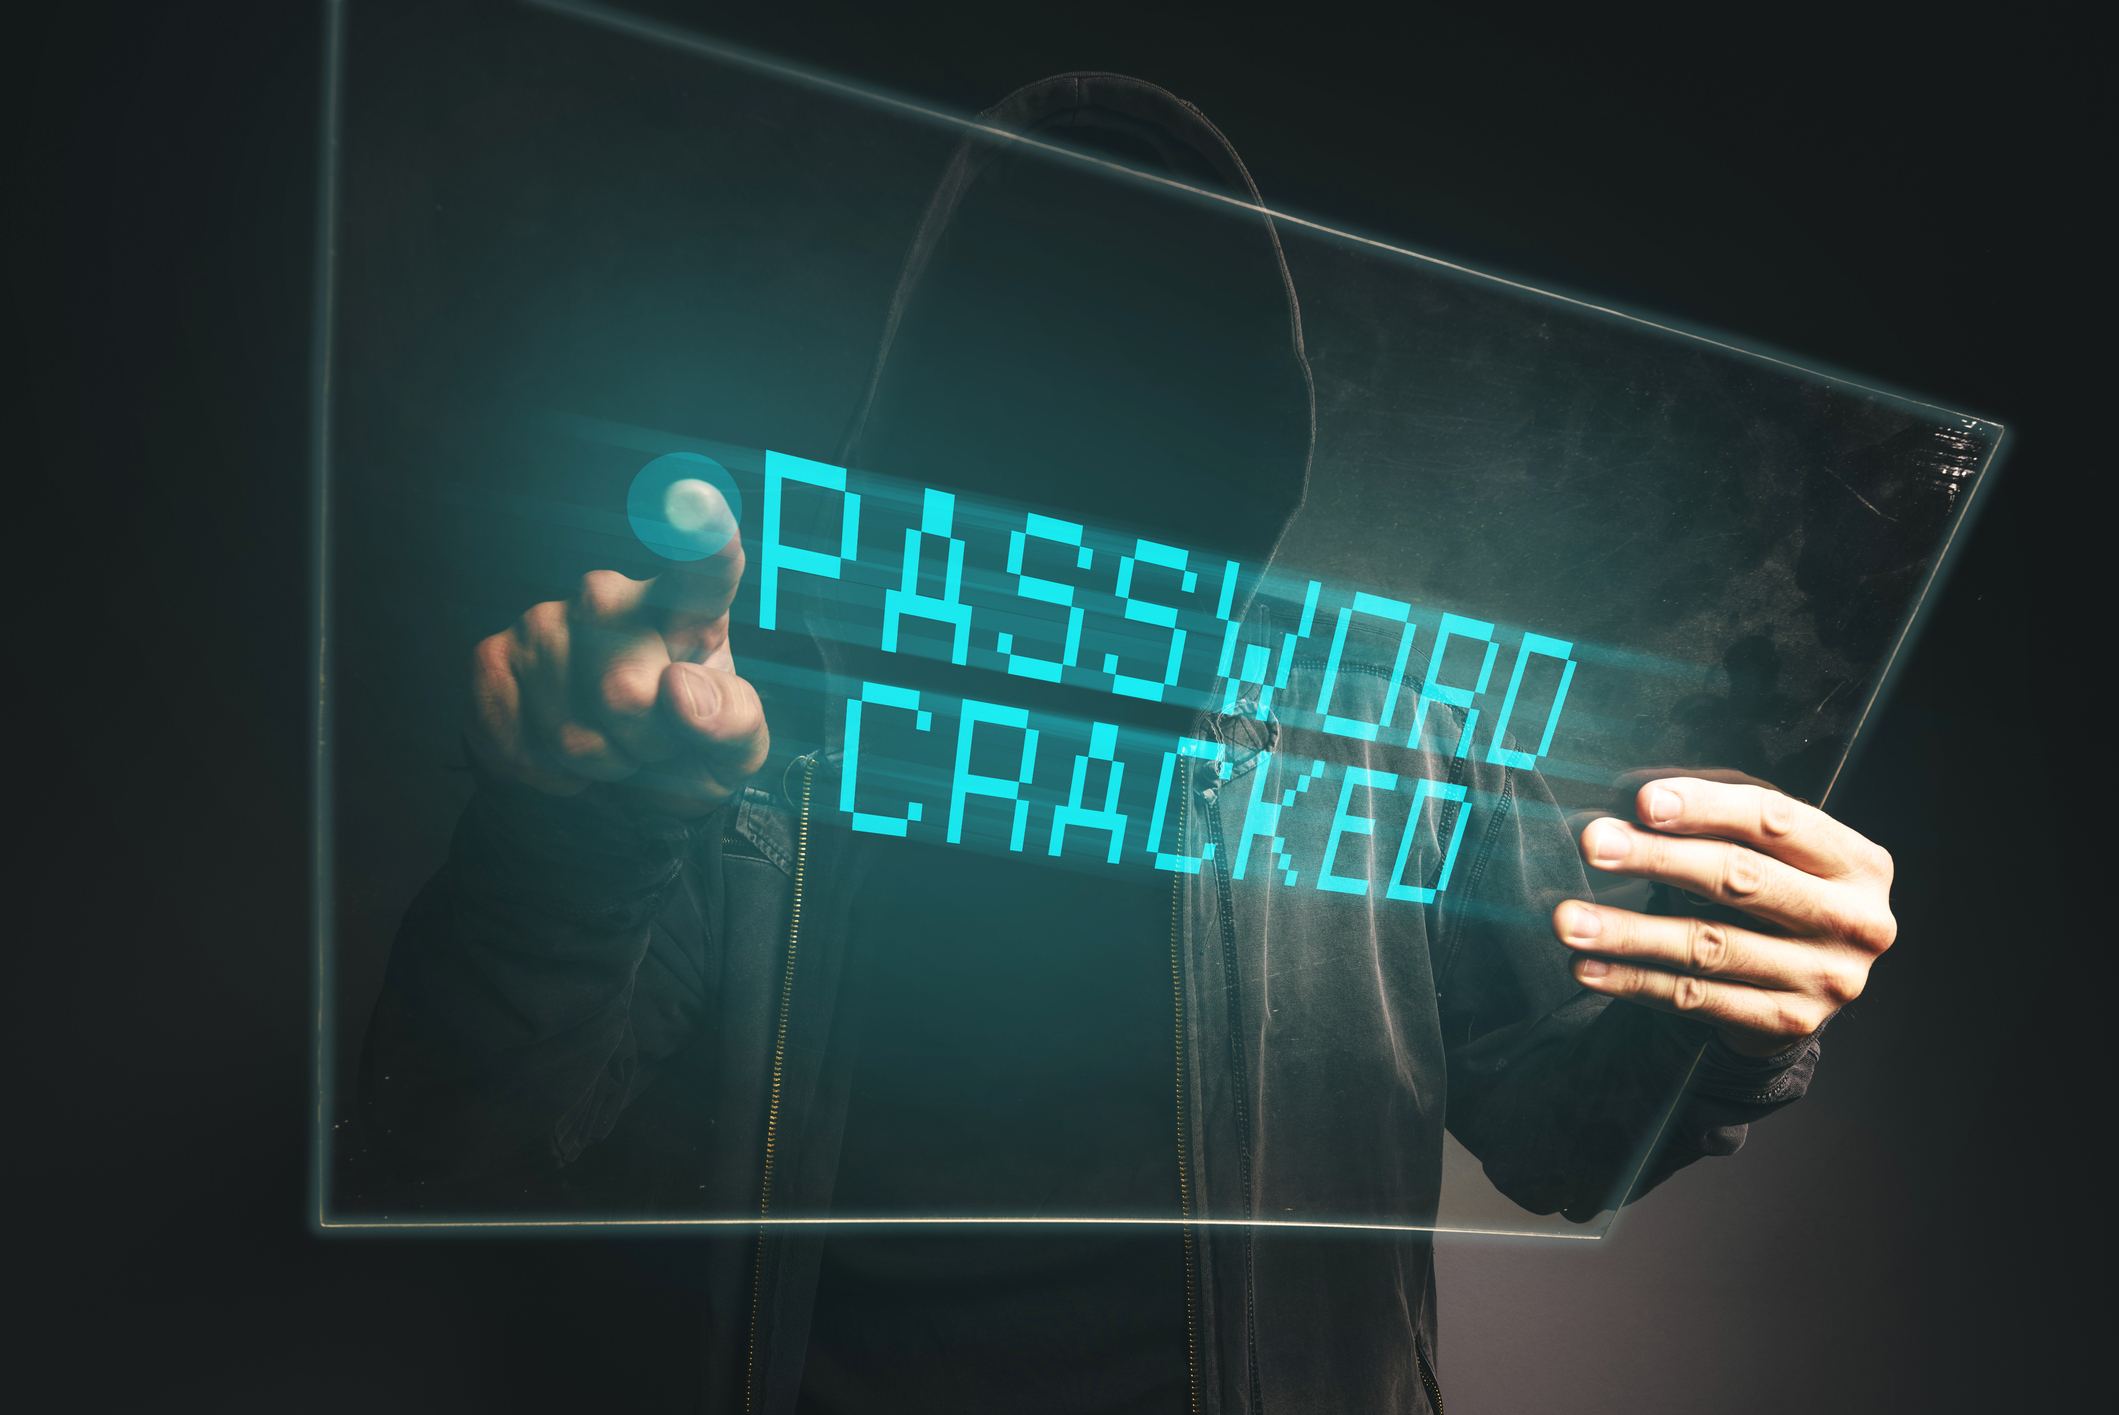 Offline Password Cracking The Attack And The Best Defense